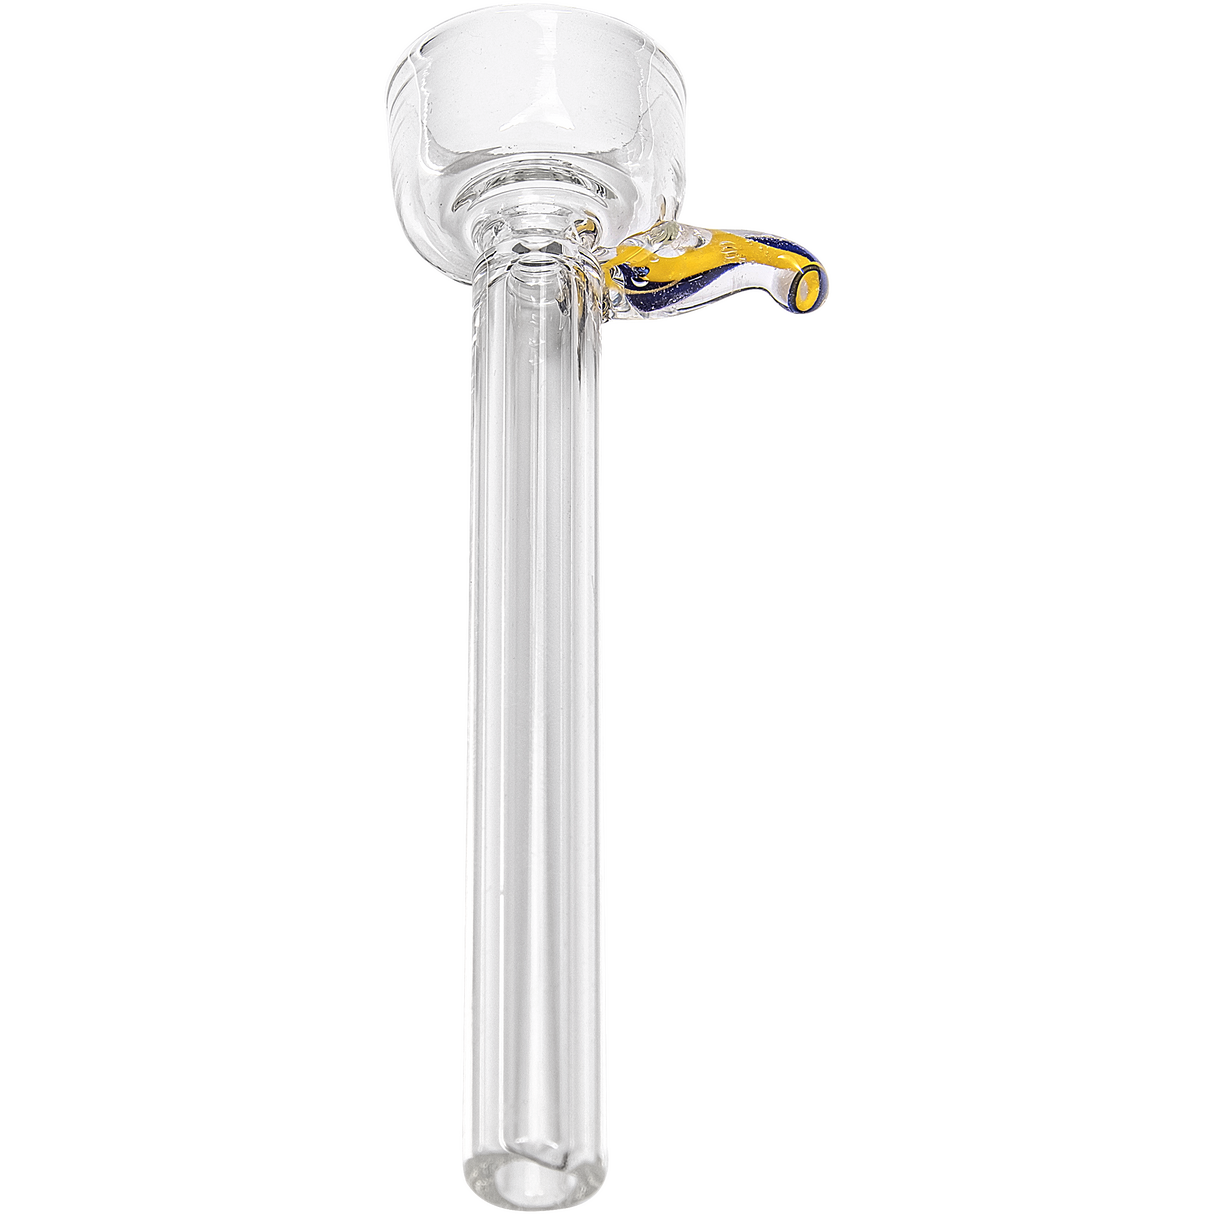 LA Pipes 9mm Clear Funnel Slide Bowl with Yellow Handle for Bongs, Front View